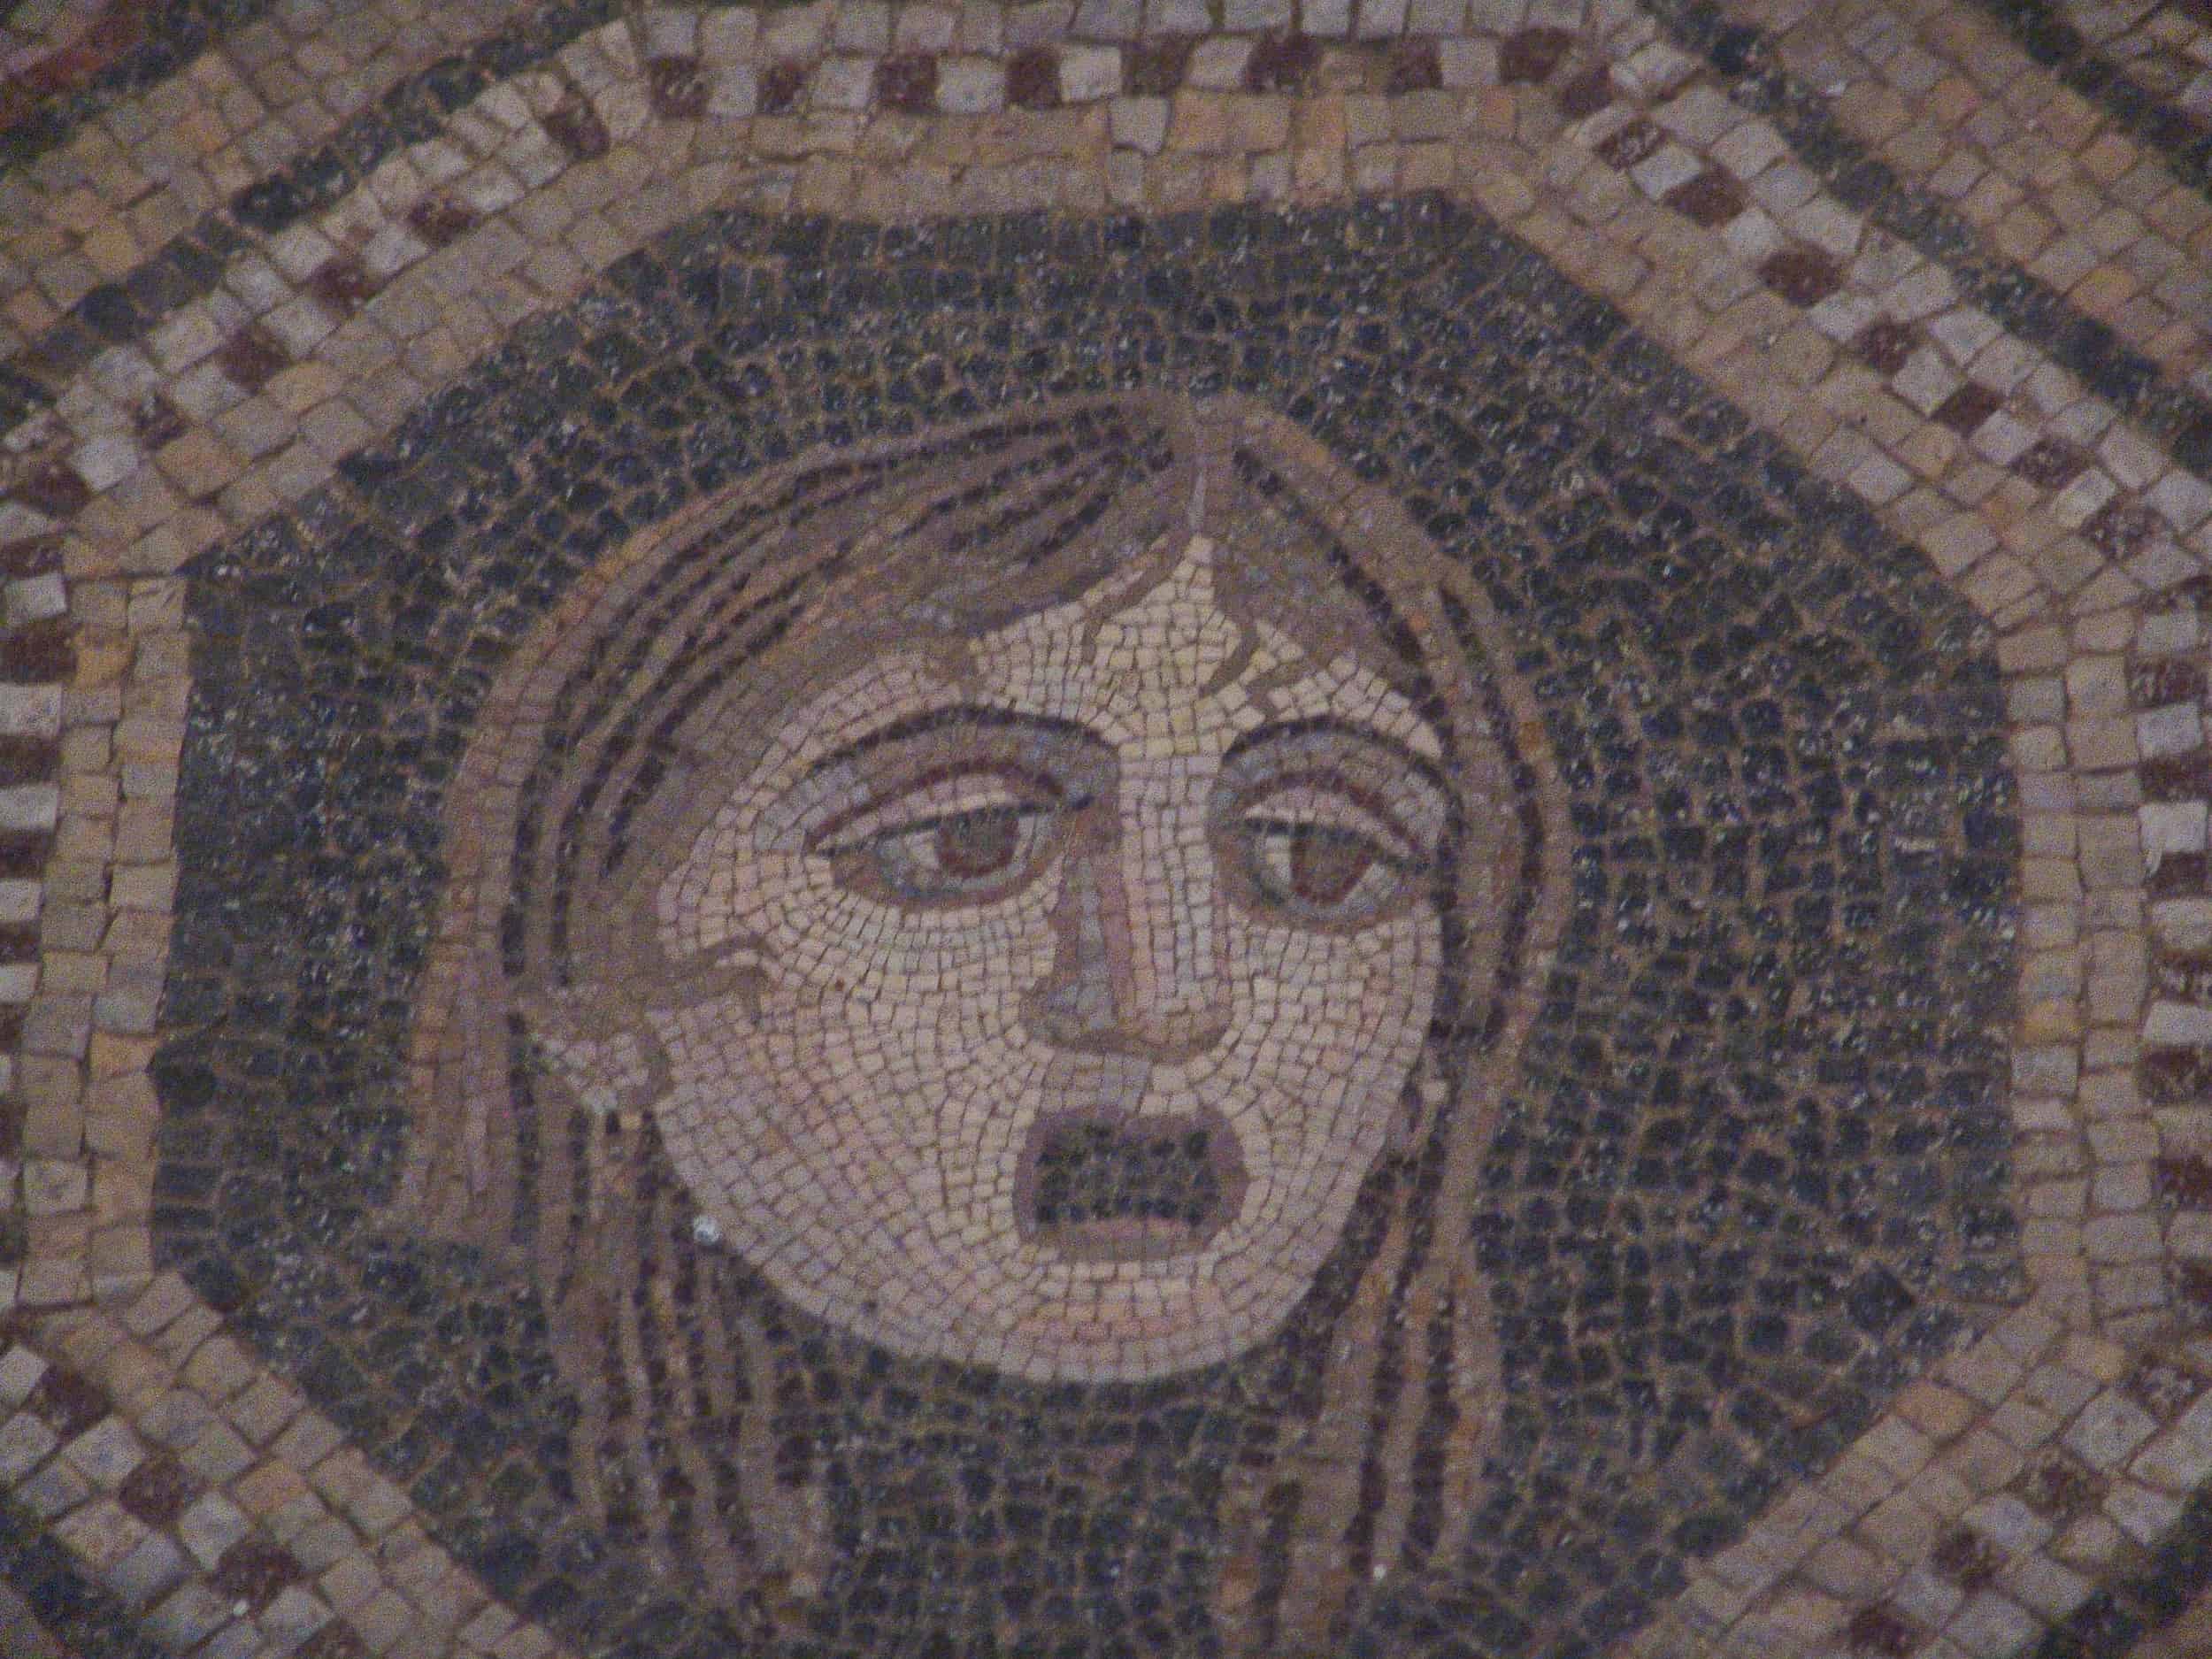 Woman on a mosaic floor of Building Z in the Lower Acropolis of Pergamon